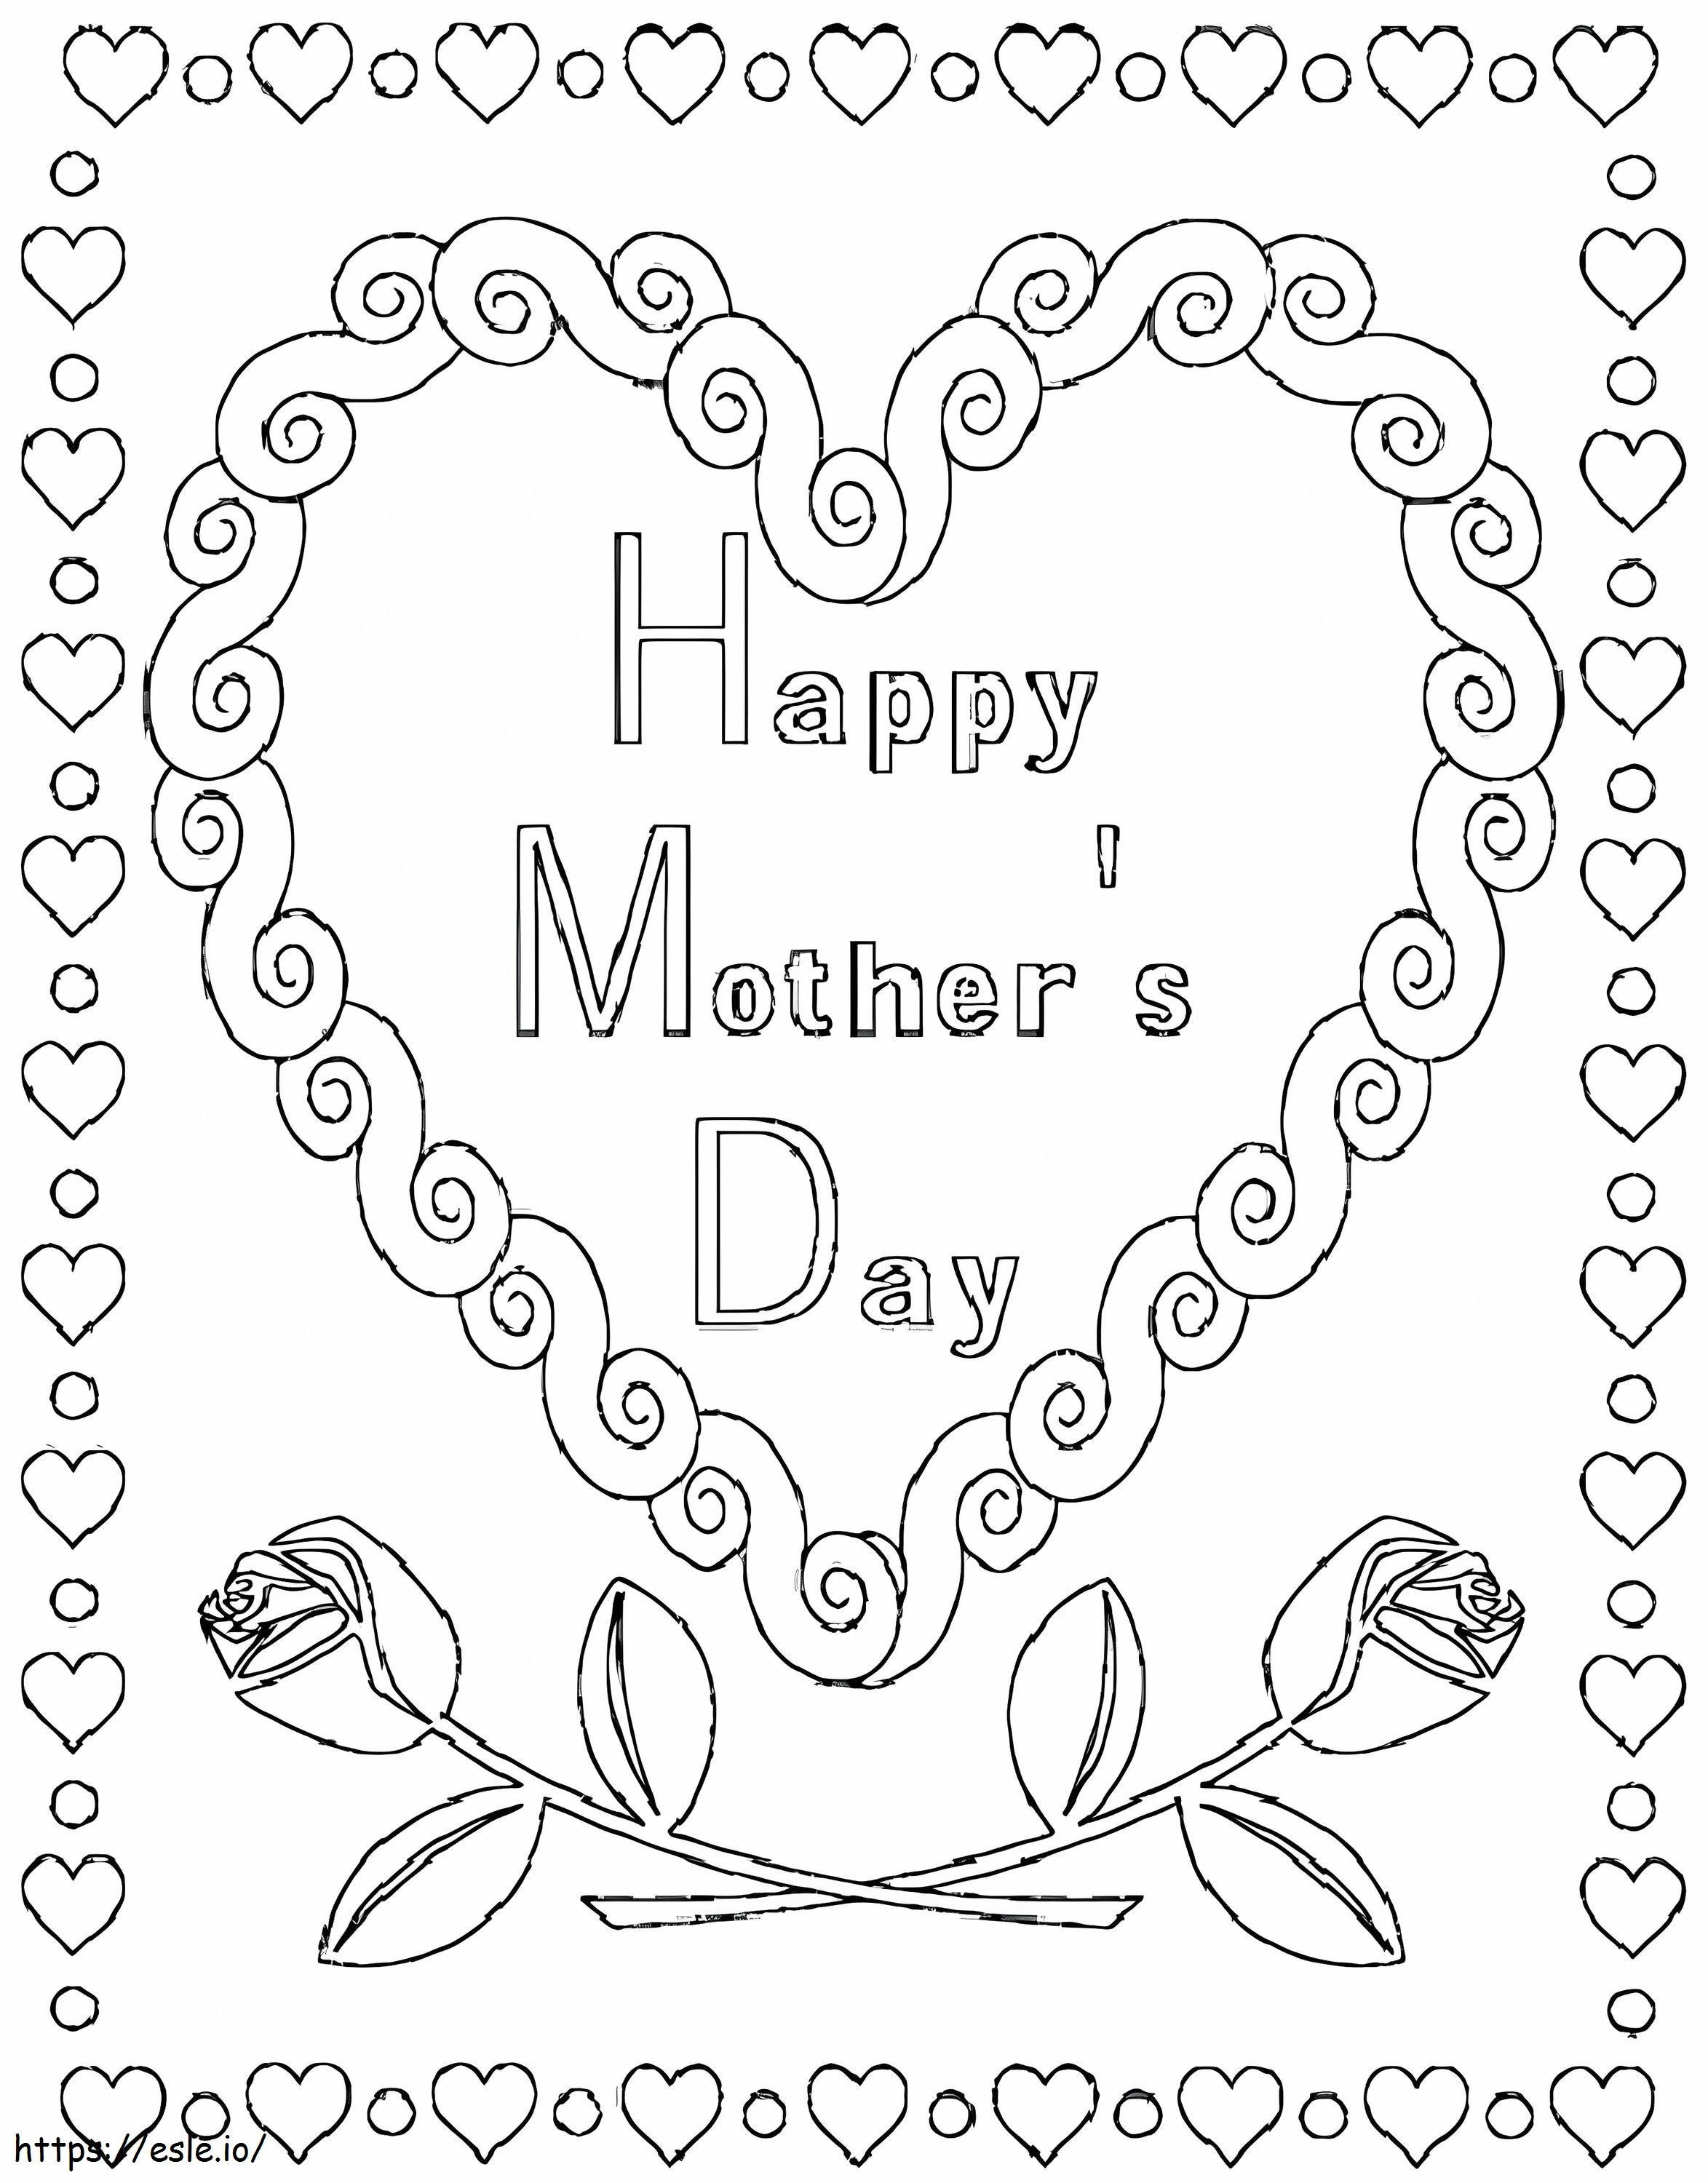 Mothers Day Card coloring page